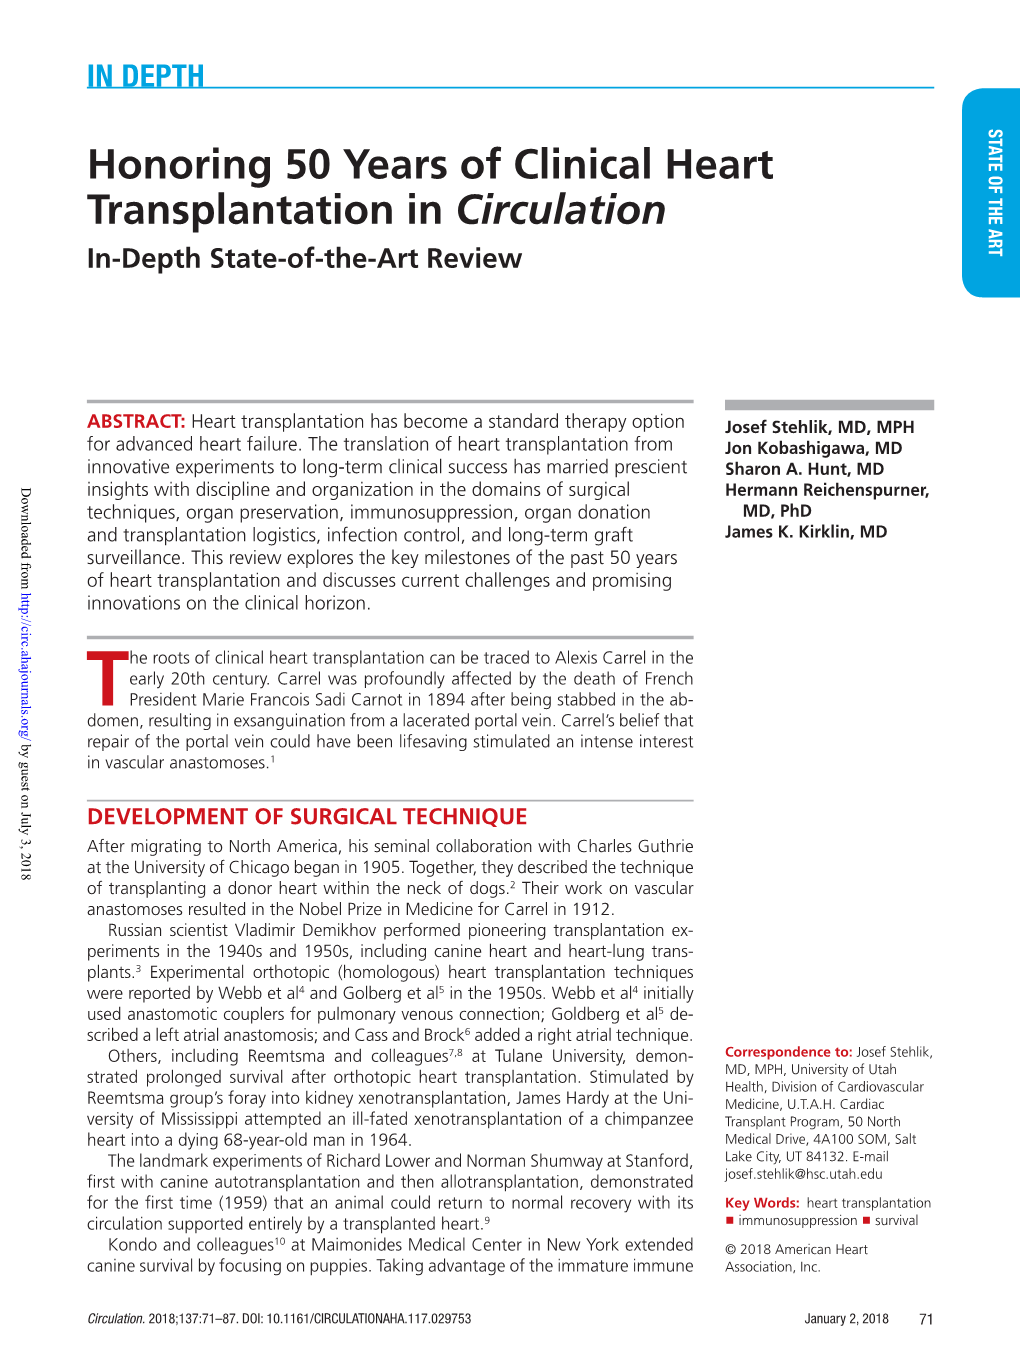 Honoring 50 Years of Clinical Heart Transplantation in Circulation: In-Depth State-Of-The-Art Review Josef Stehlik, Jon Kobashigawa, Sharon A